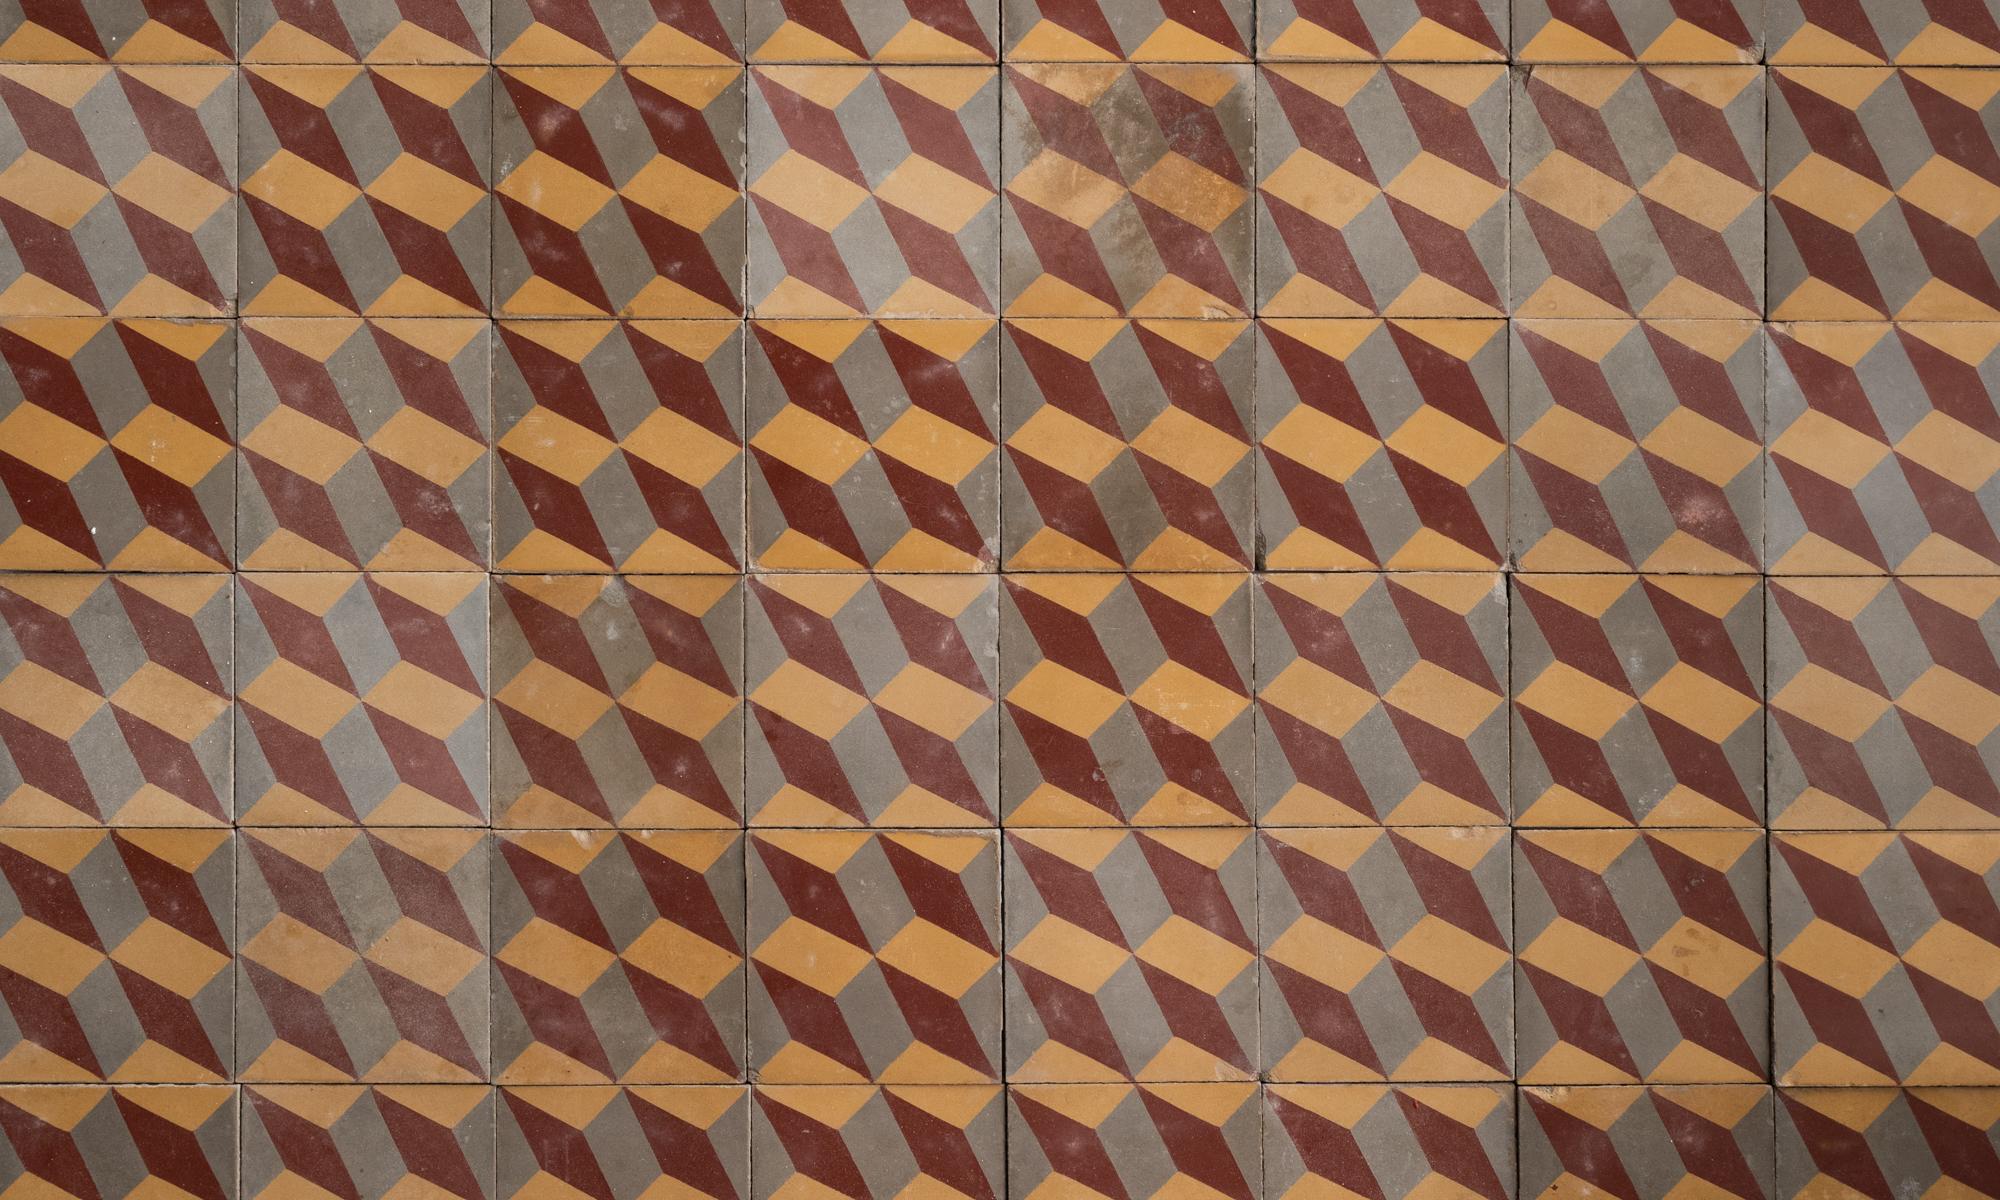 Set of (48) geometric pattern floor tiles, Europe, circa 1900.

Graphic and beautifully patinated tiles with three-color optical illusion motif.